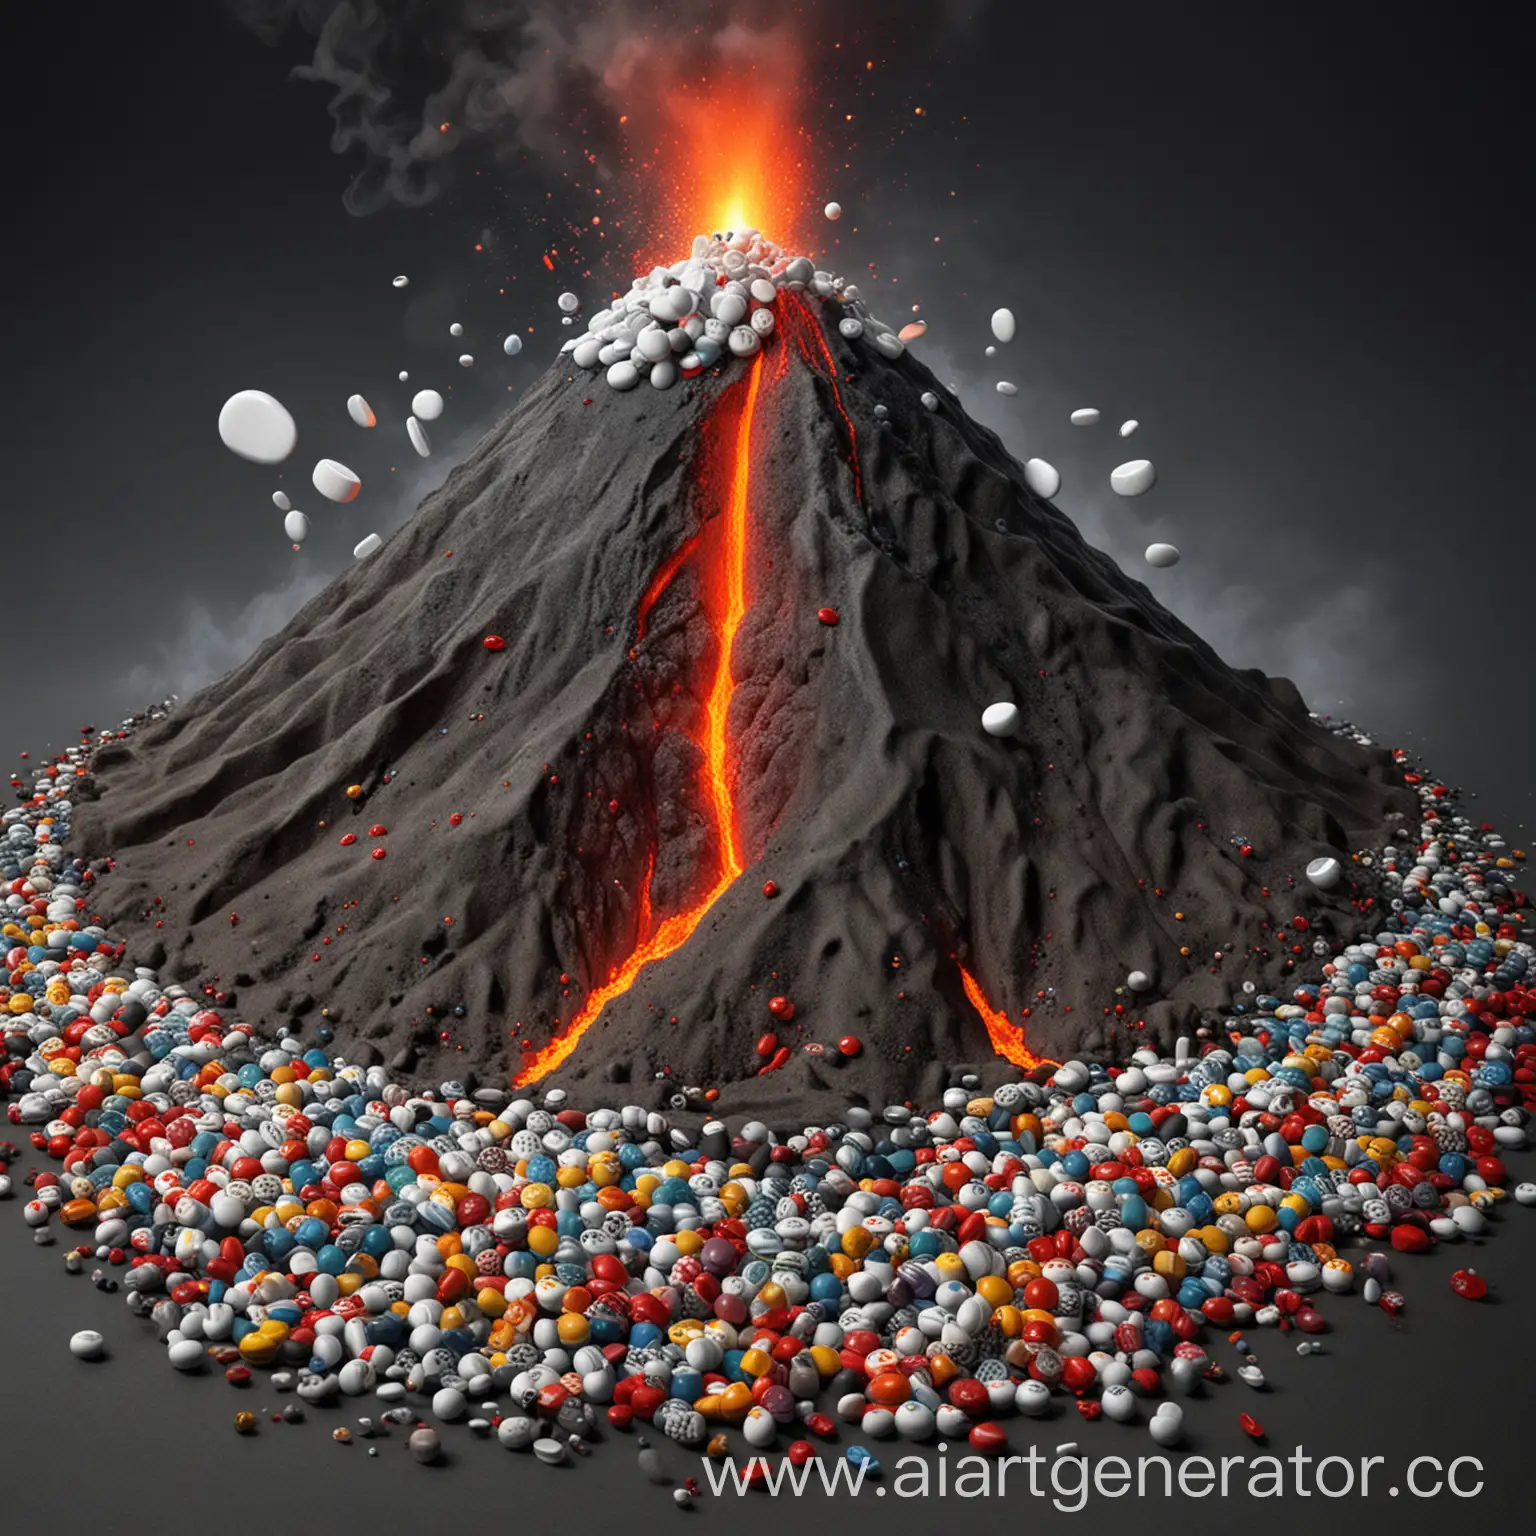 Erupting-Volcano-Surrounded-by-Colorful-Pills